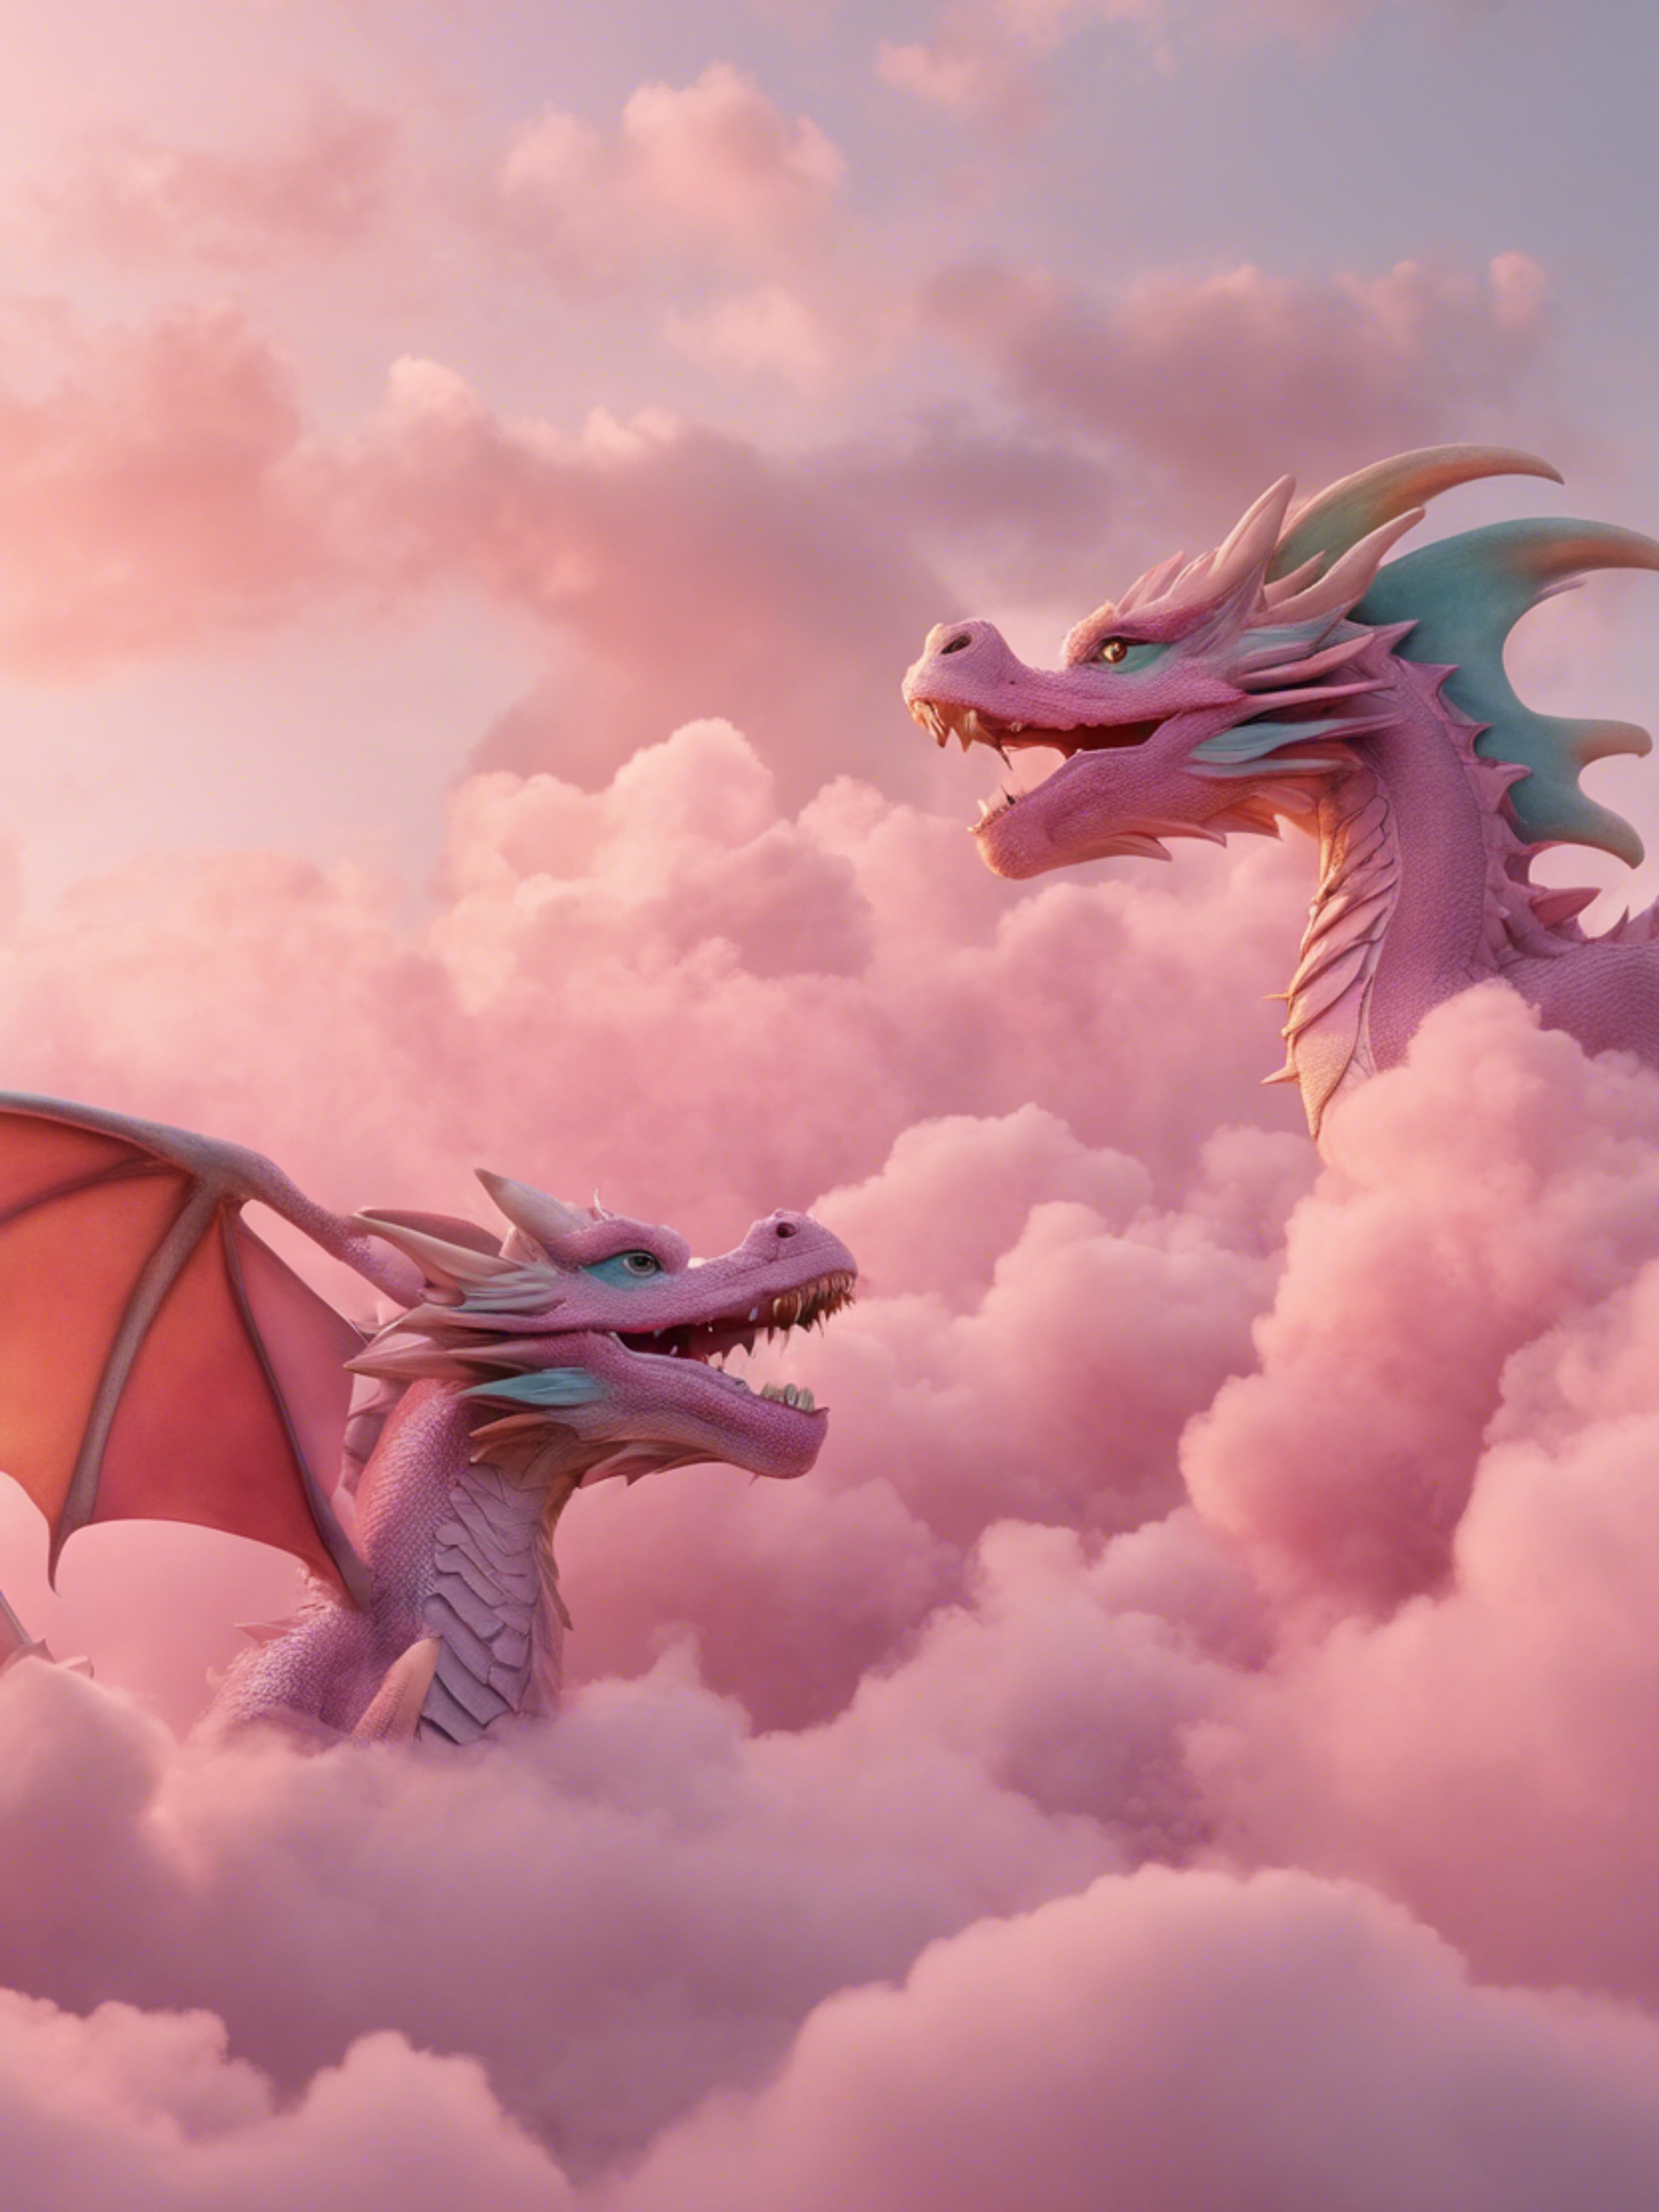 Trio of playful pastel-colored dragons flitting among fluffy pink clouds during sunrise. Tapeta[e1ca69721ca941939a18]